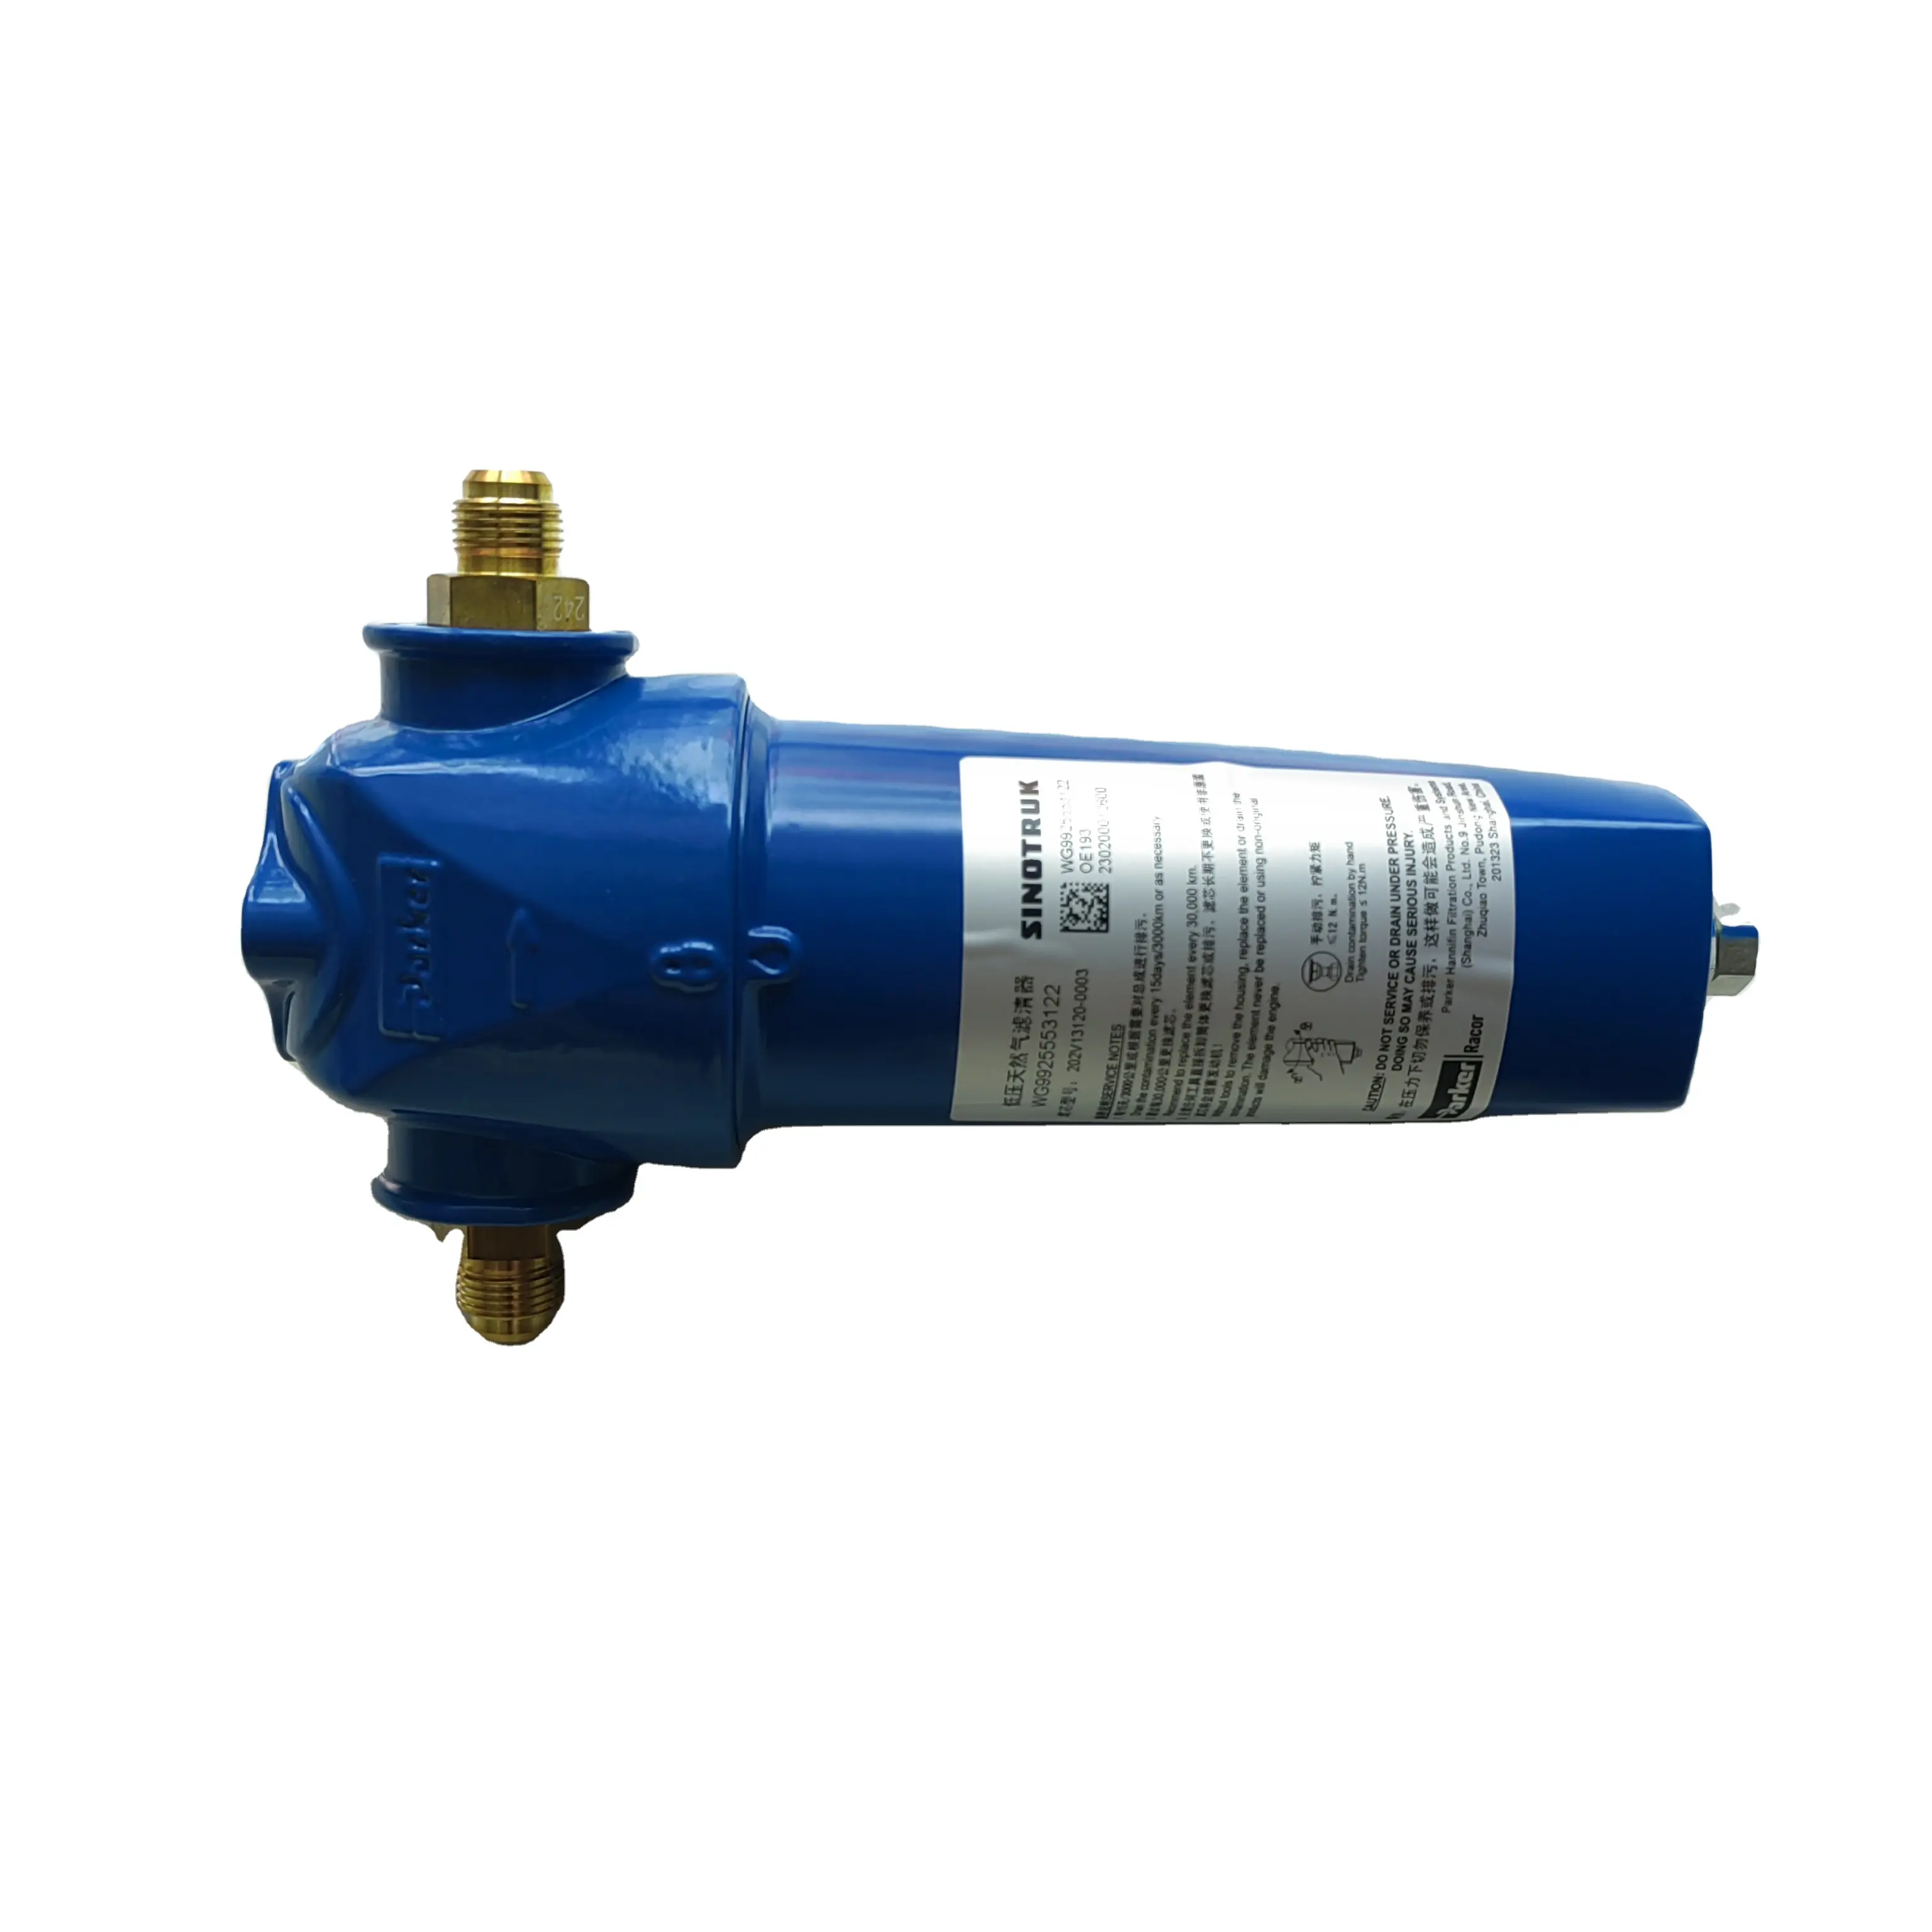 Applicable to the gas filter assembly of heavy-duty truck MAN engine WG9925553122 202V13120-0003 202V13120-0002